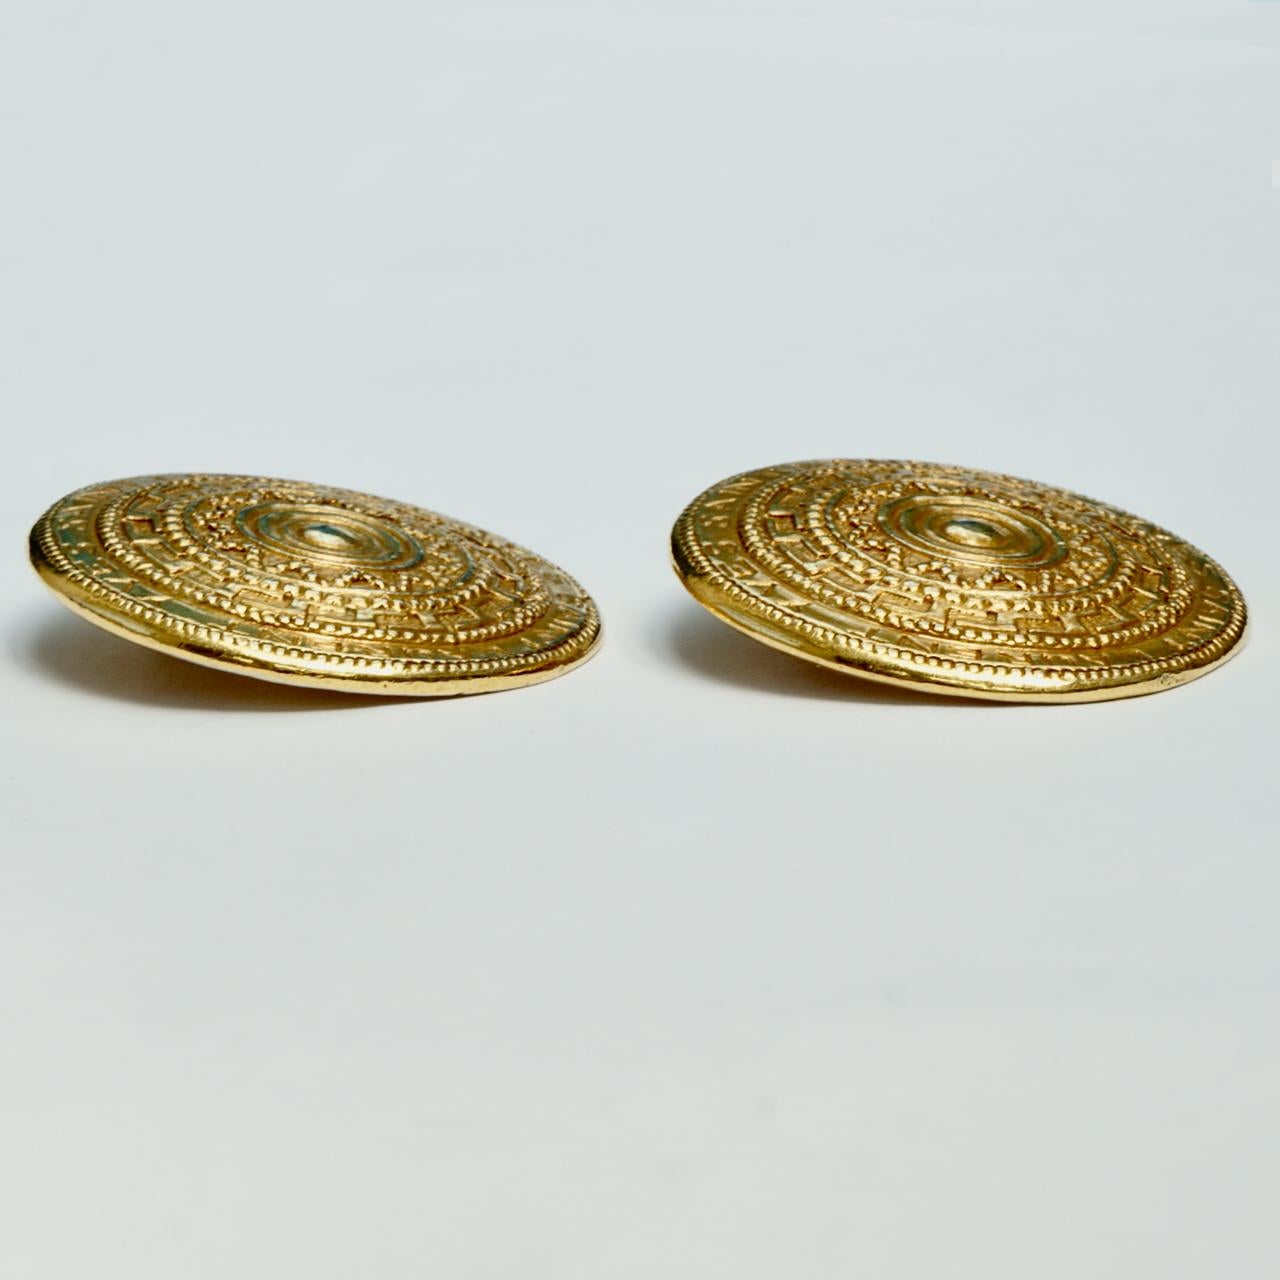 Yves Saint Laurent Gold Tone Round Clip On Statement Earrings circa 1980s In Good Condition For Sale In London, GB